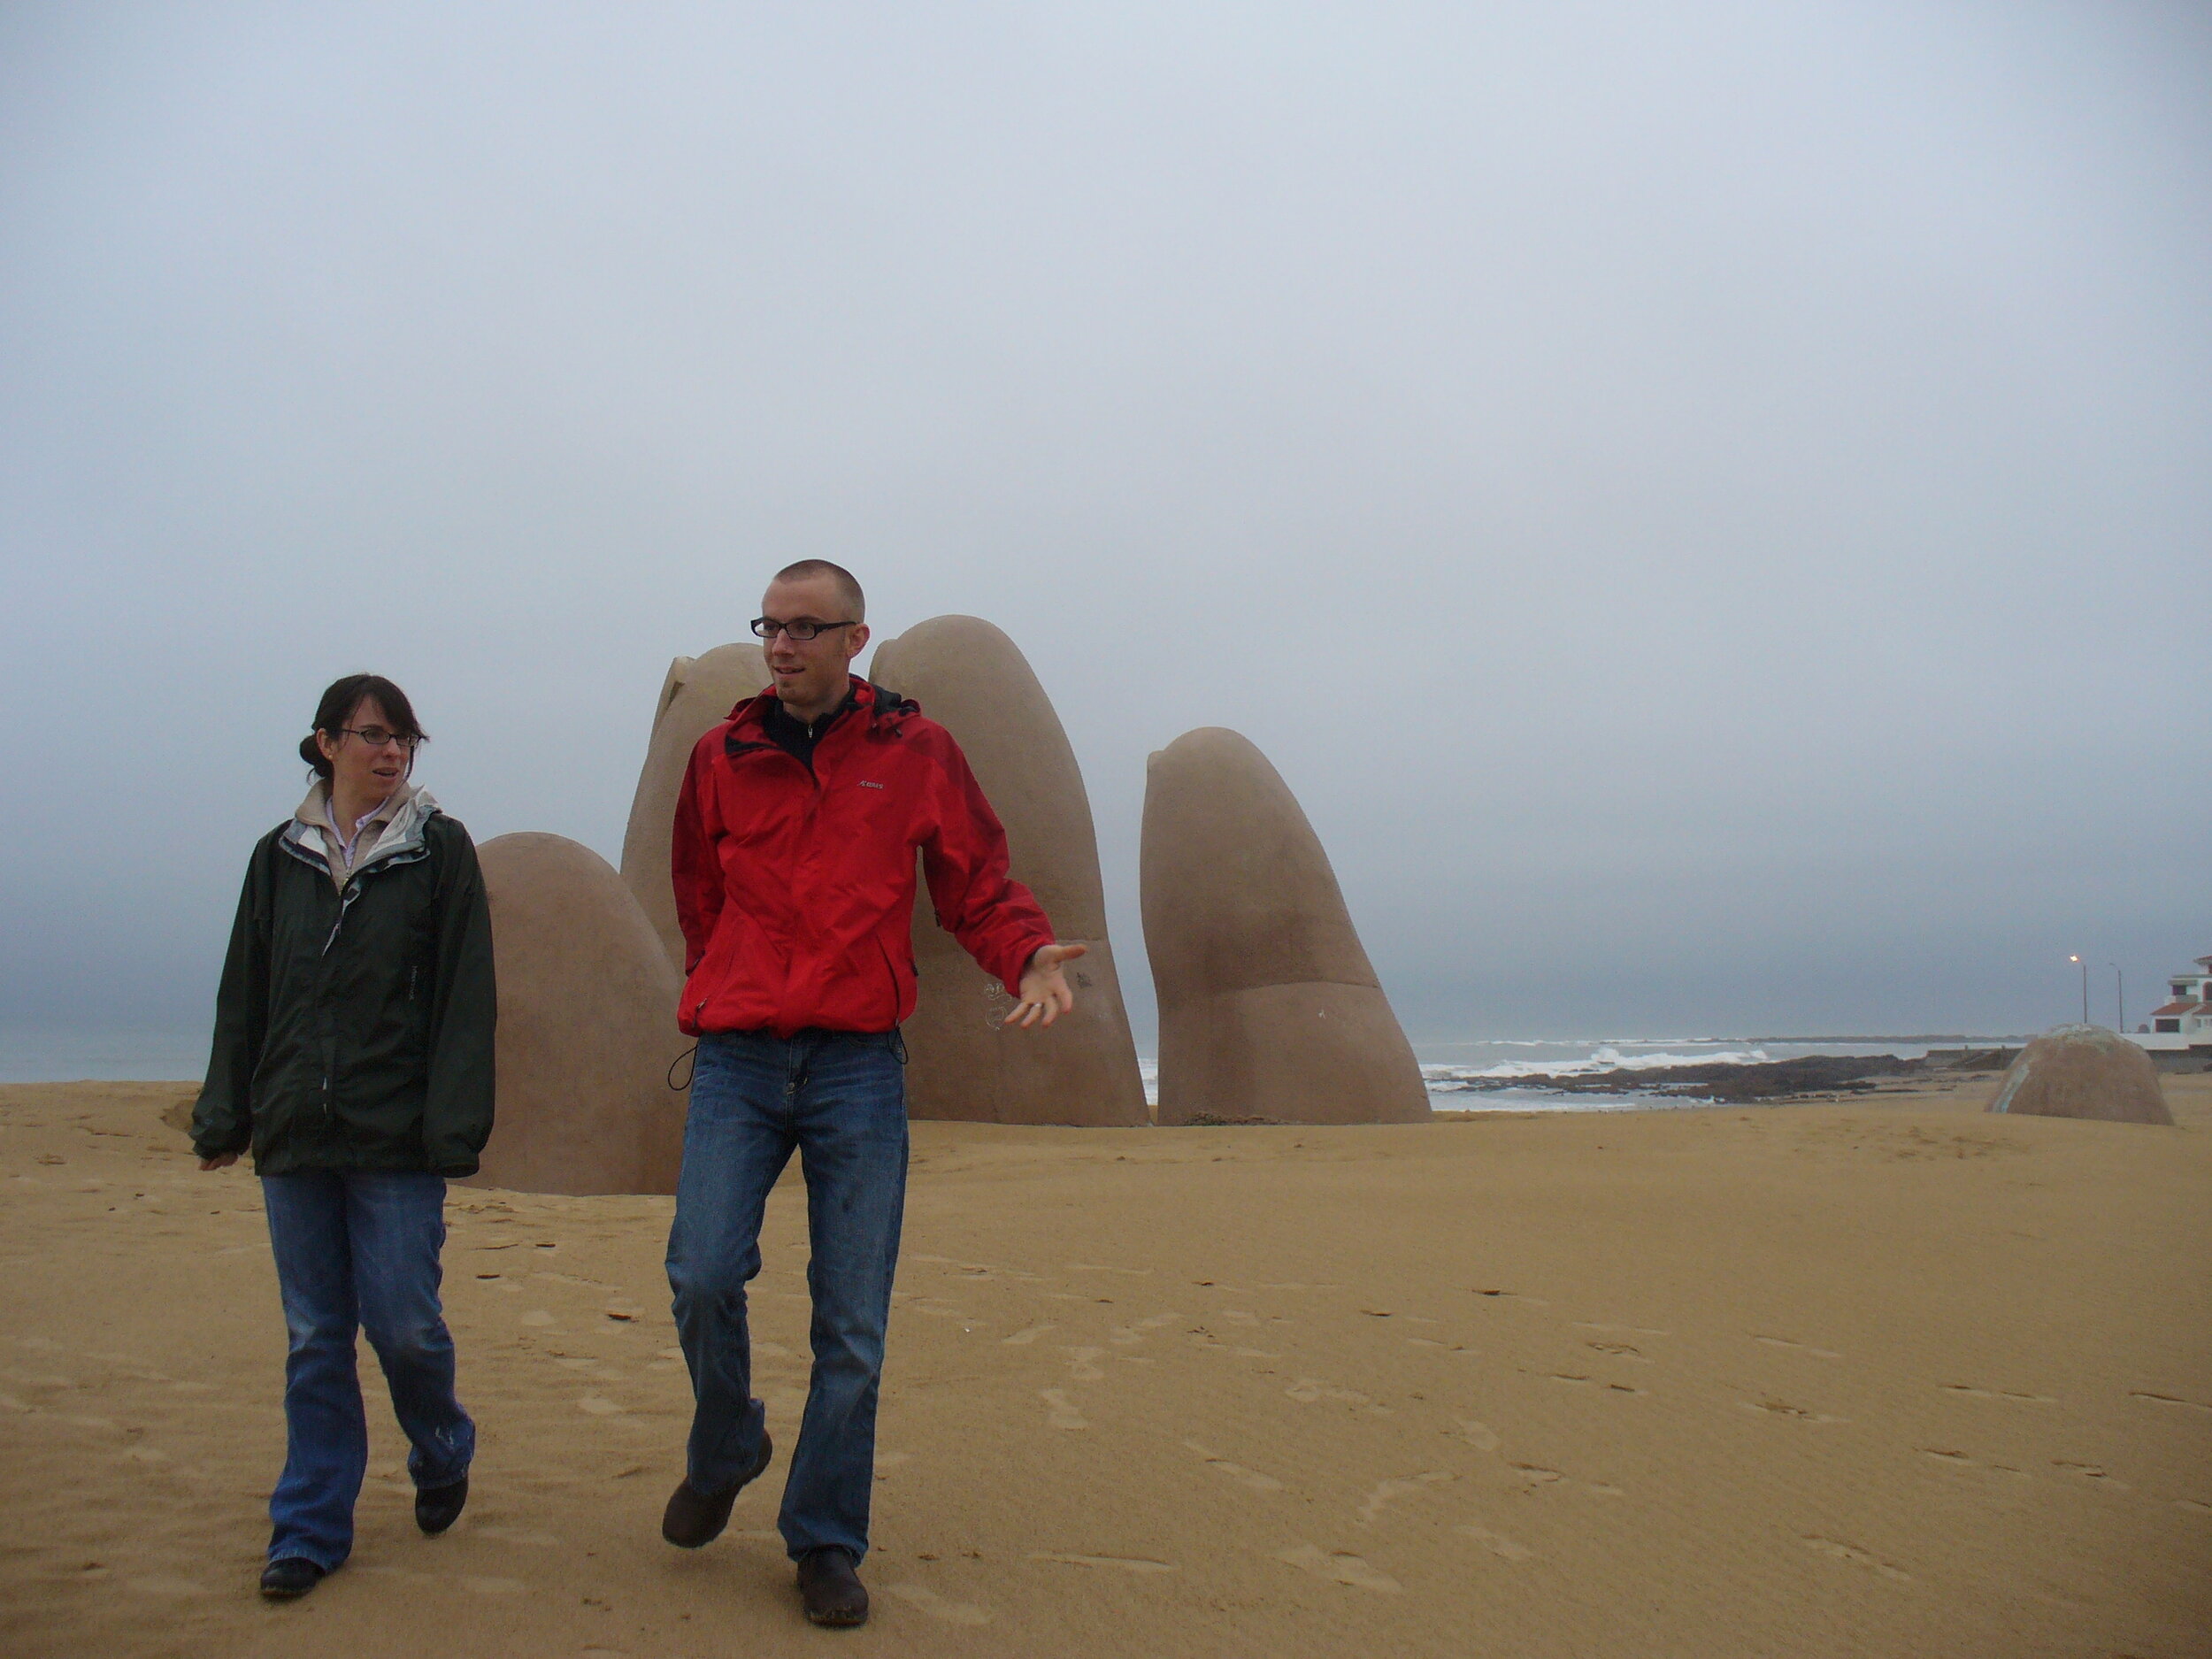 Visiting 'La Mano'... a hand sculpture sticking up out of the beach sand